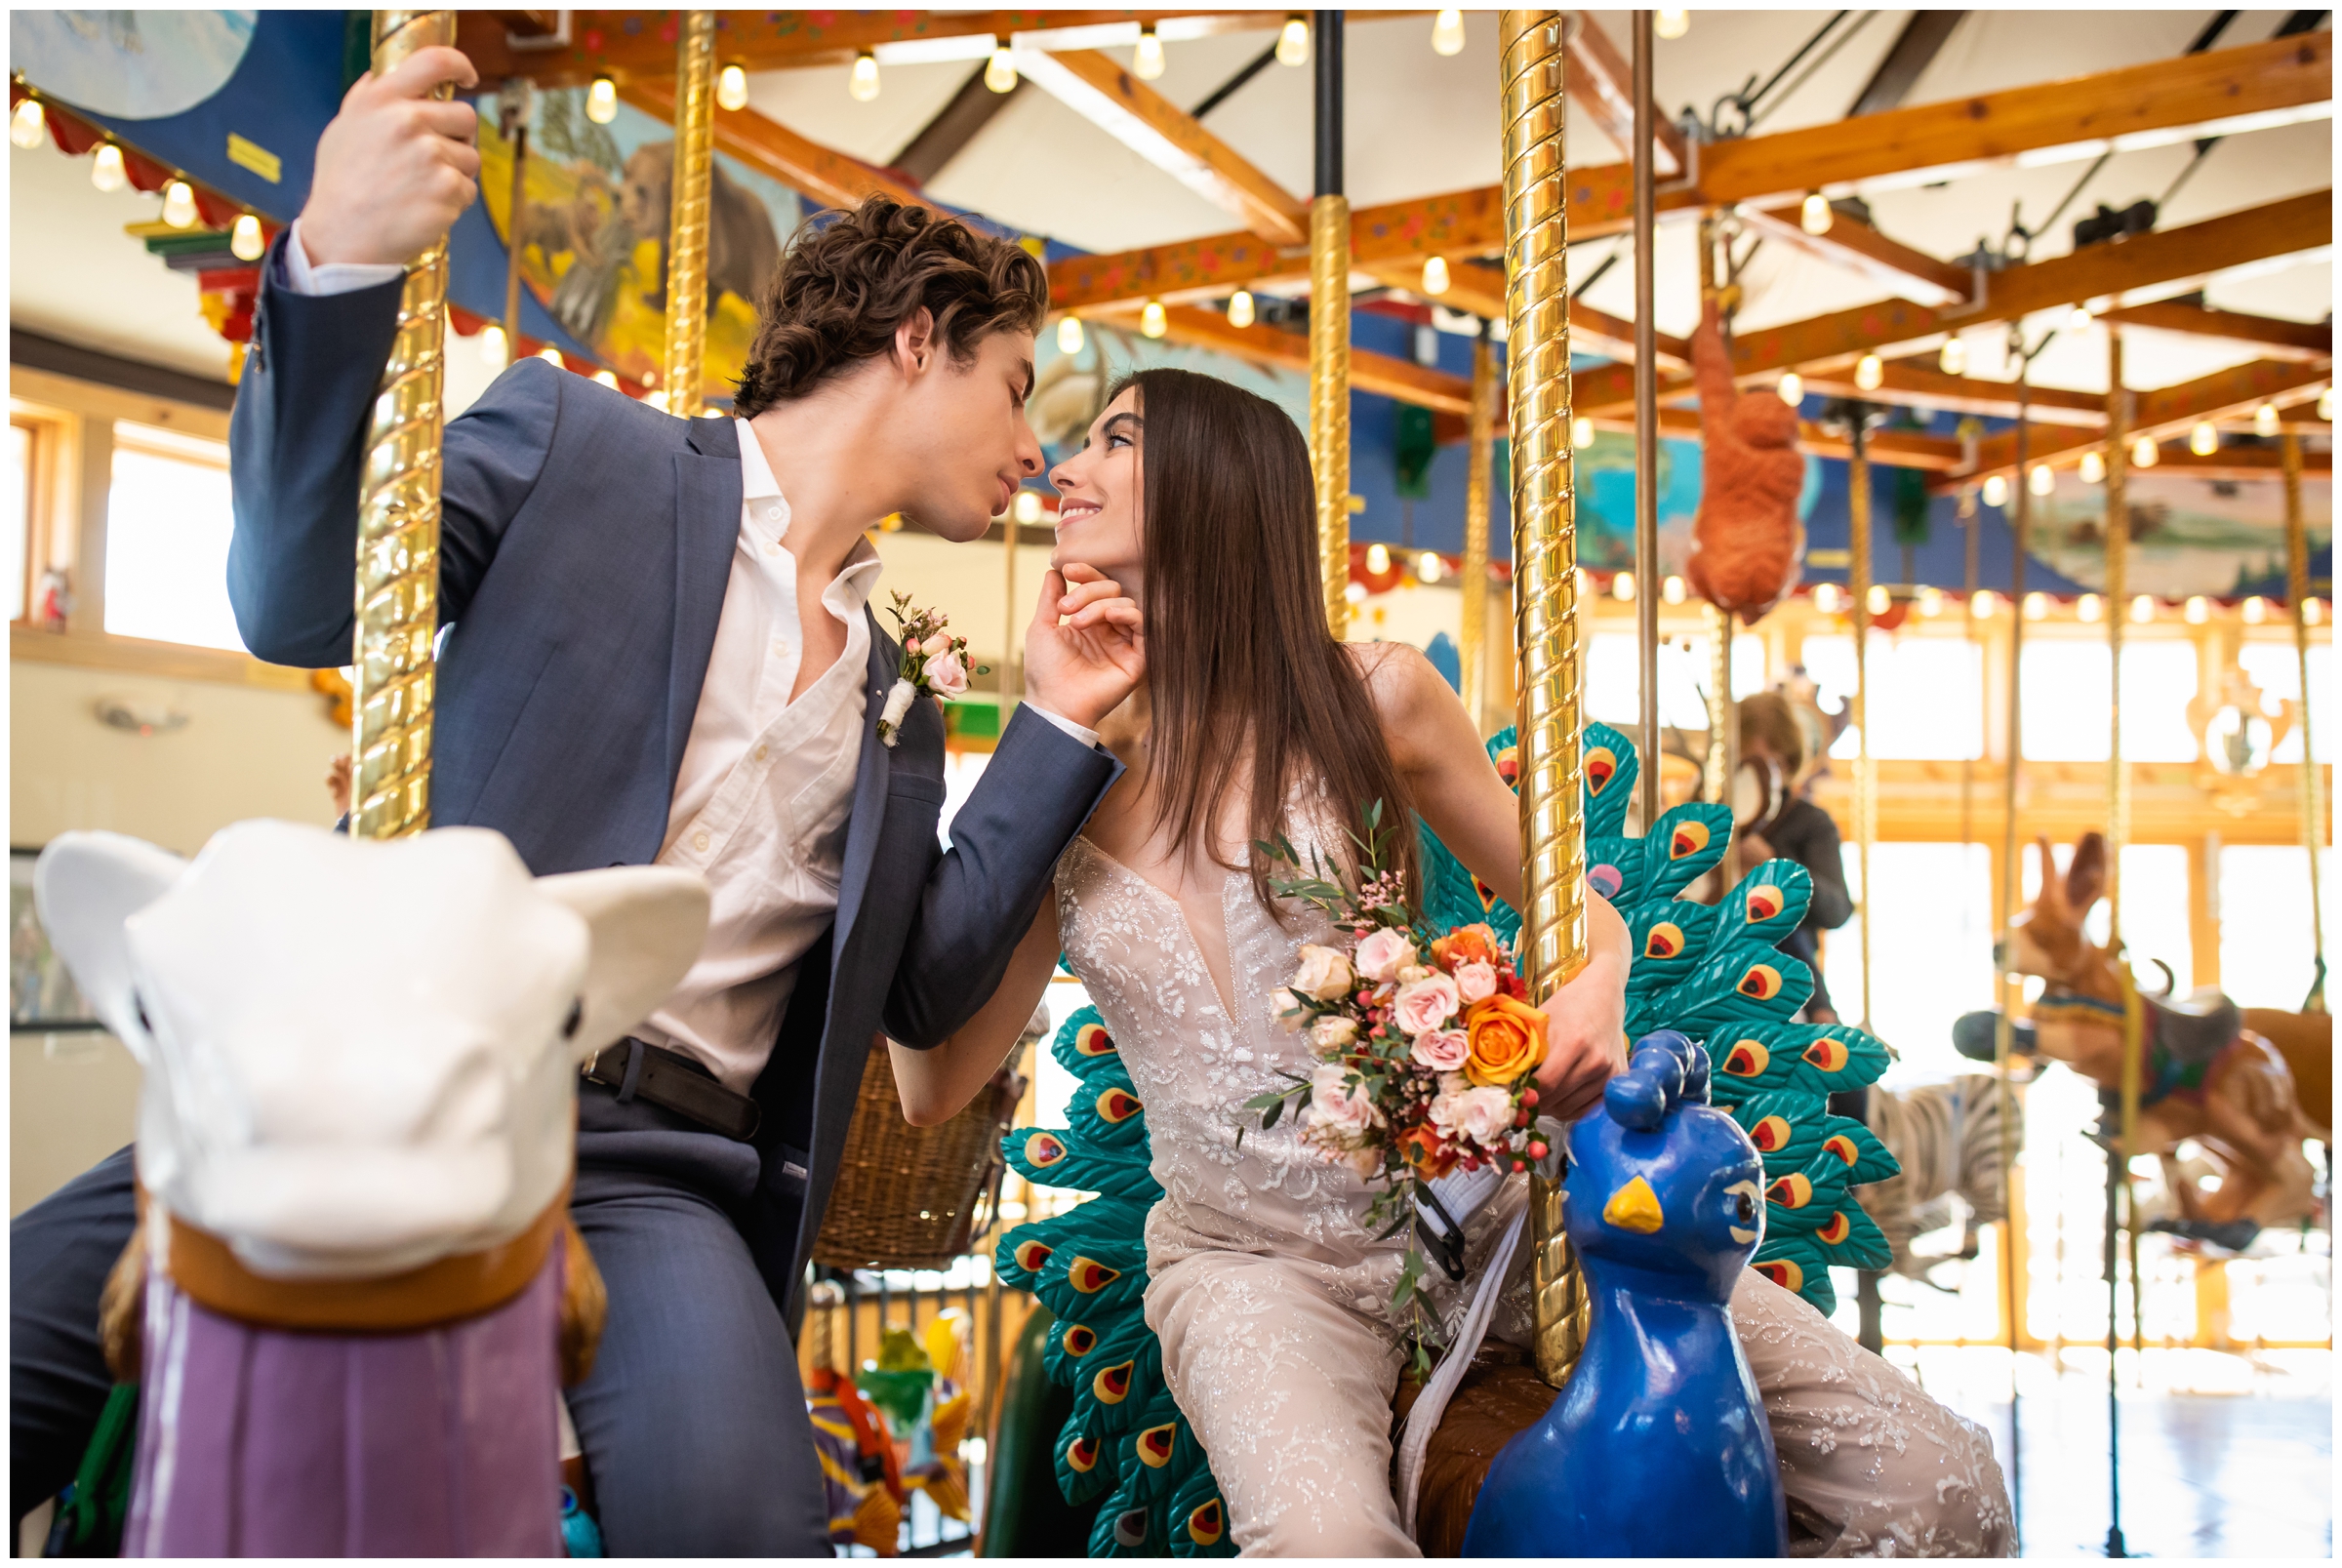 couple riding on carousel of happiness during unique Colorado elopement wedding portraits in Nederland